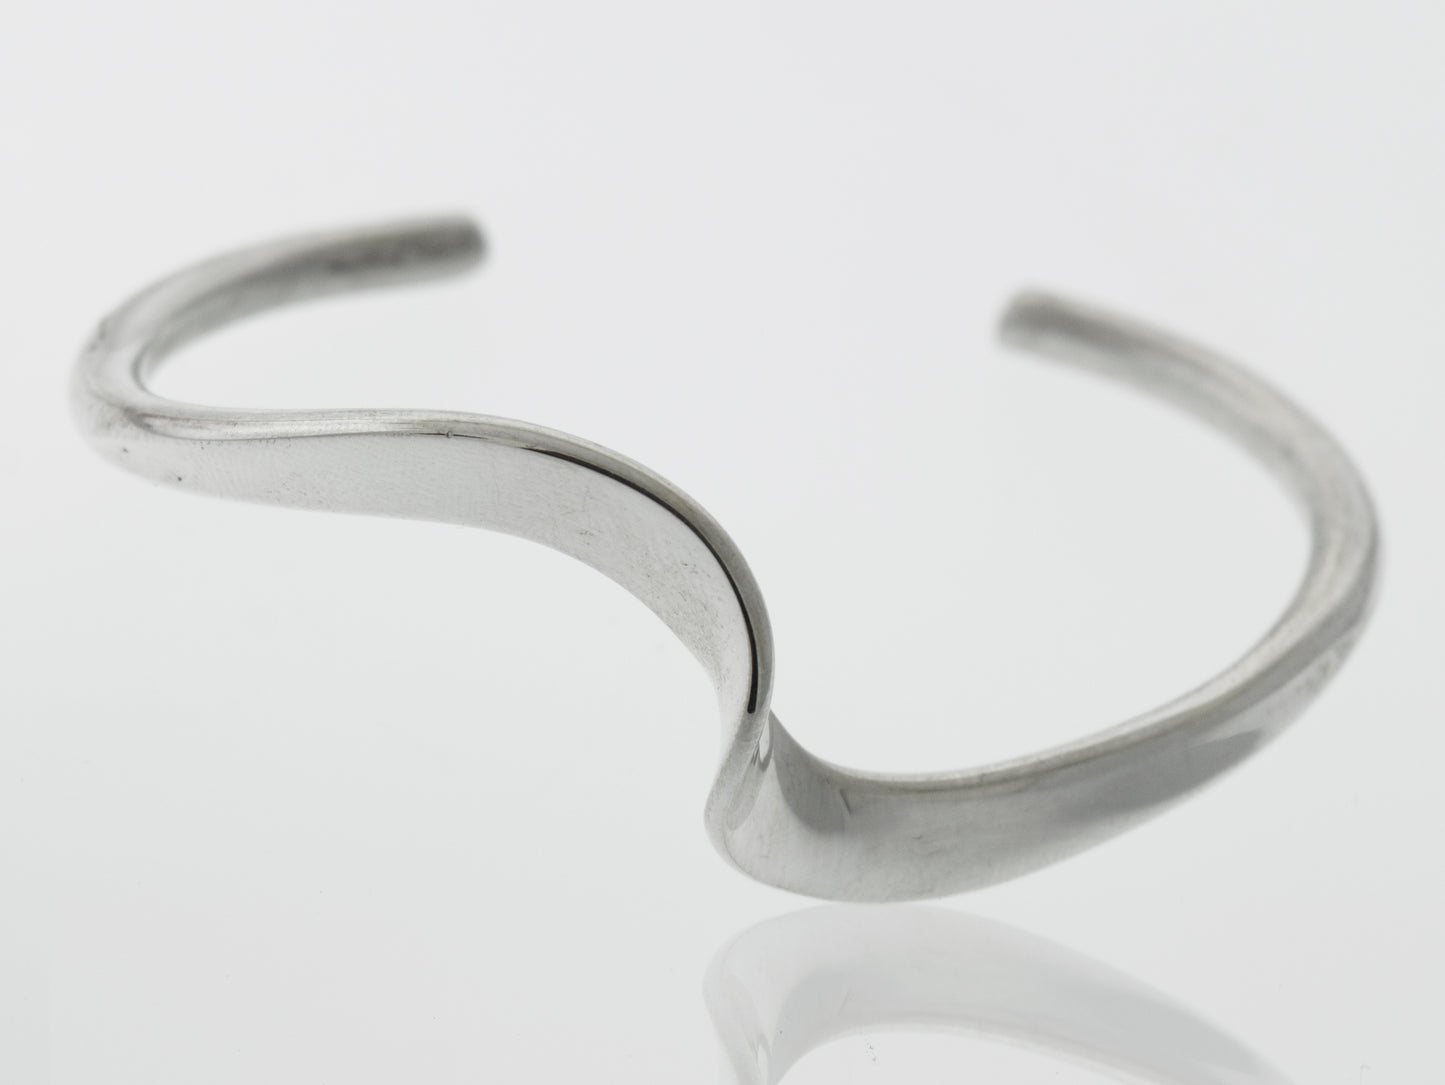 A simple Native American Handmade Thick Silver Wave Cuff bracelet with a curved shape, perfect as a gift from Super Silver.